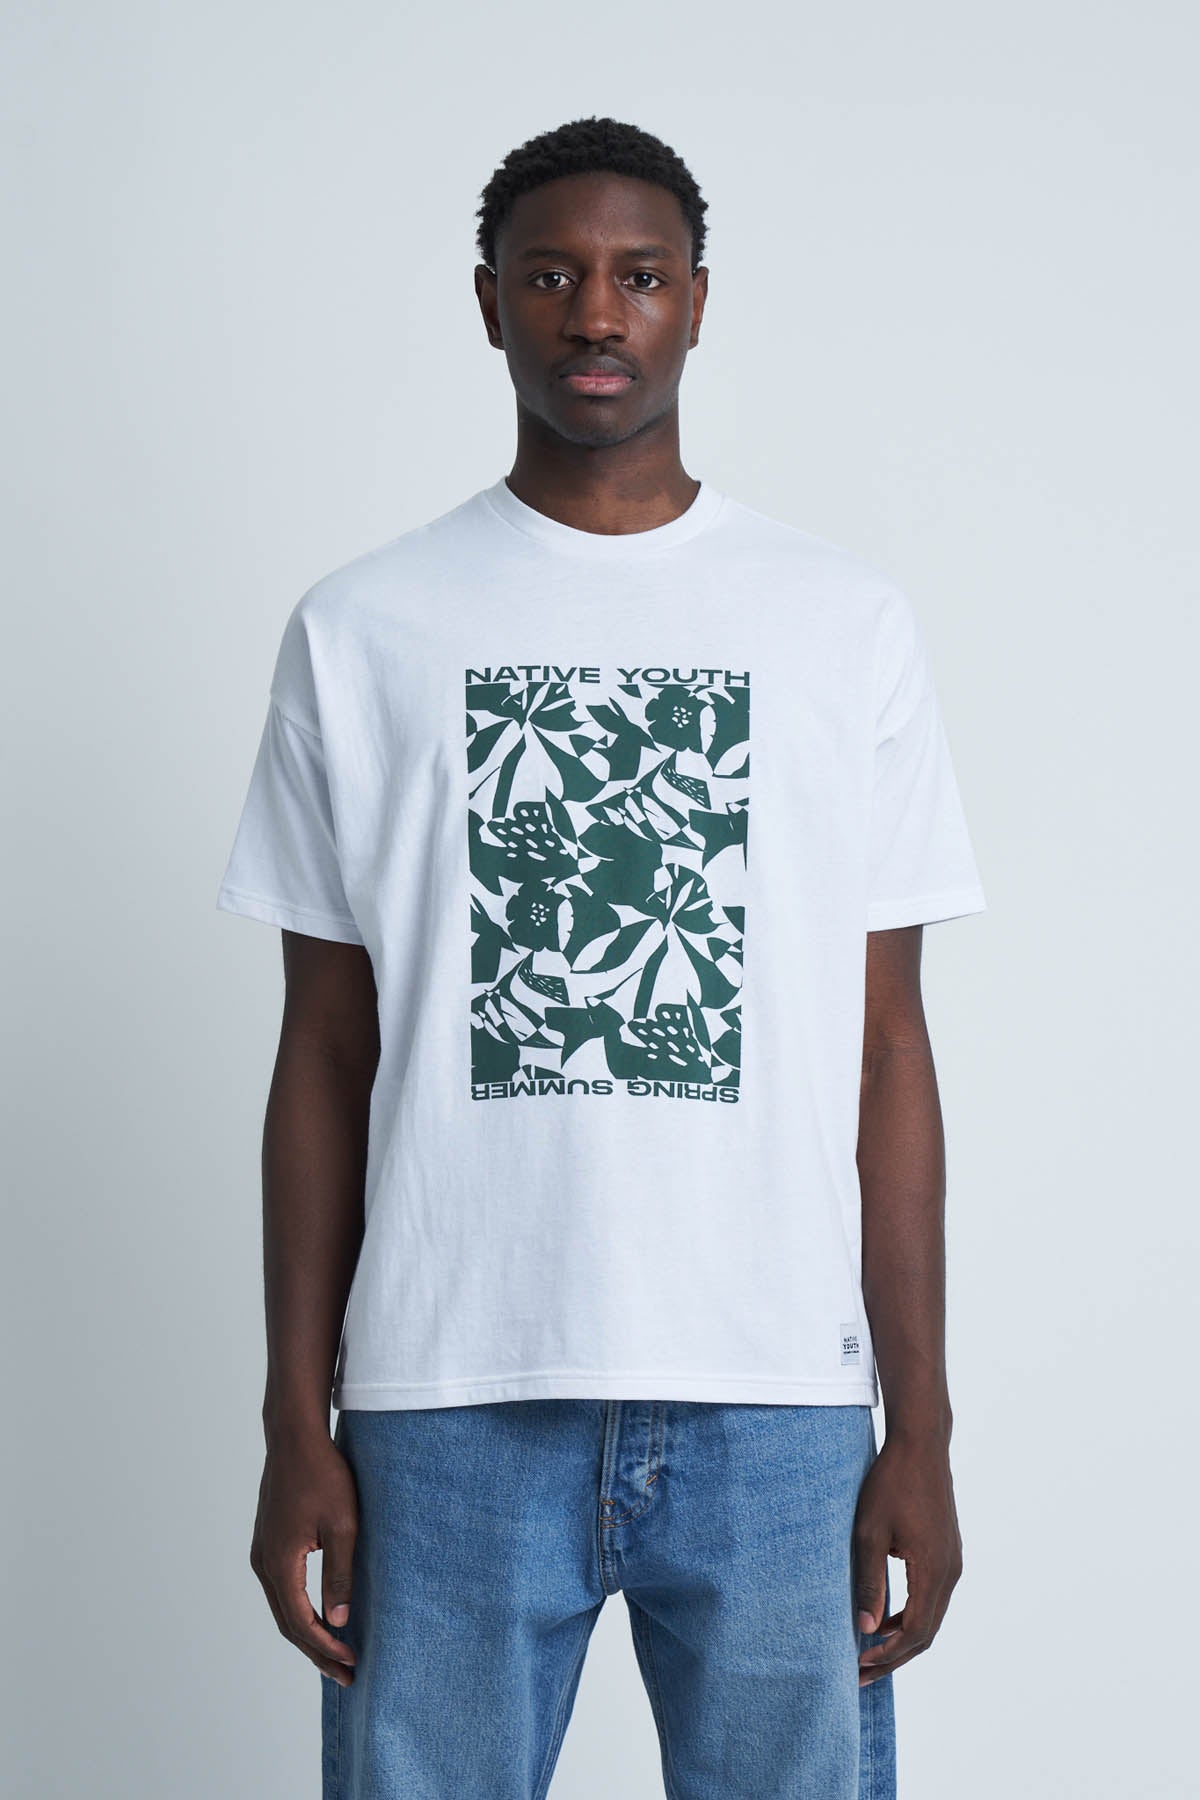 NEW IN: Men's Tops & T-Shirts | Native Youth